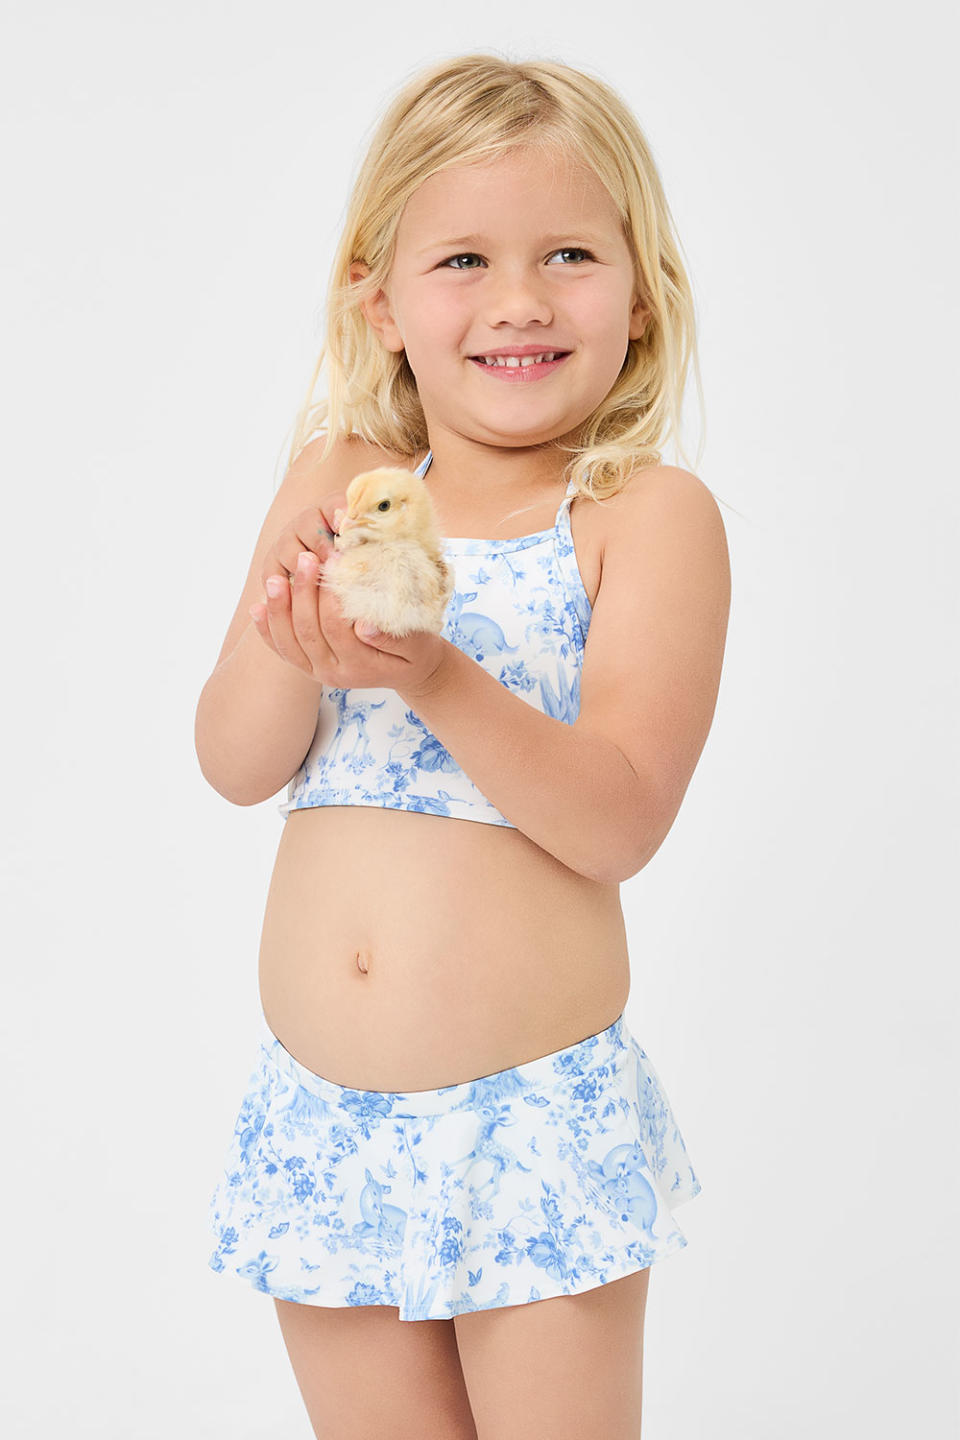 Pieces from Frankies Bikinis’ childrenswear collection Lil Frankies. - Credit: Courtesy Photo